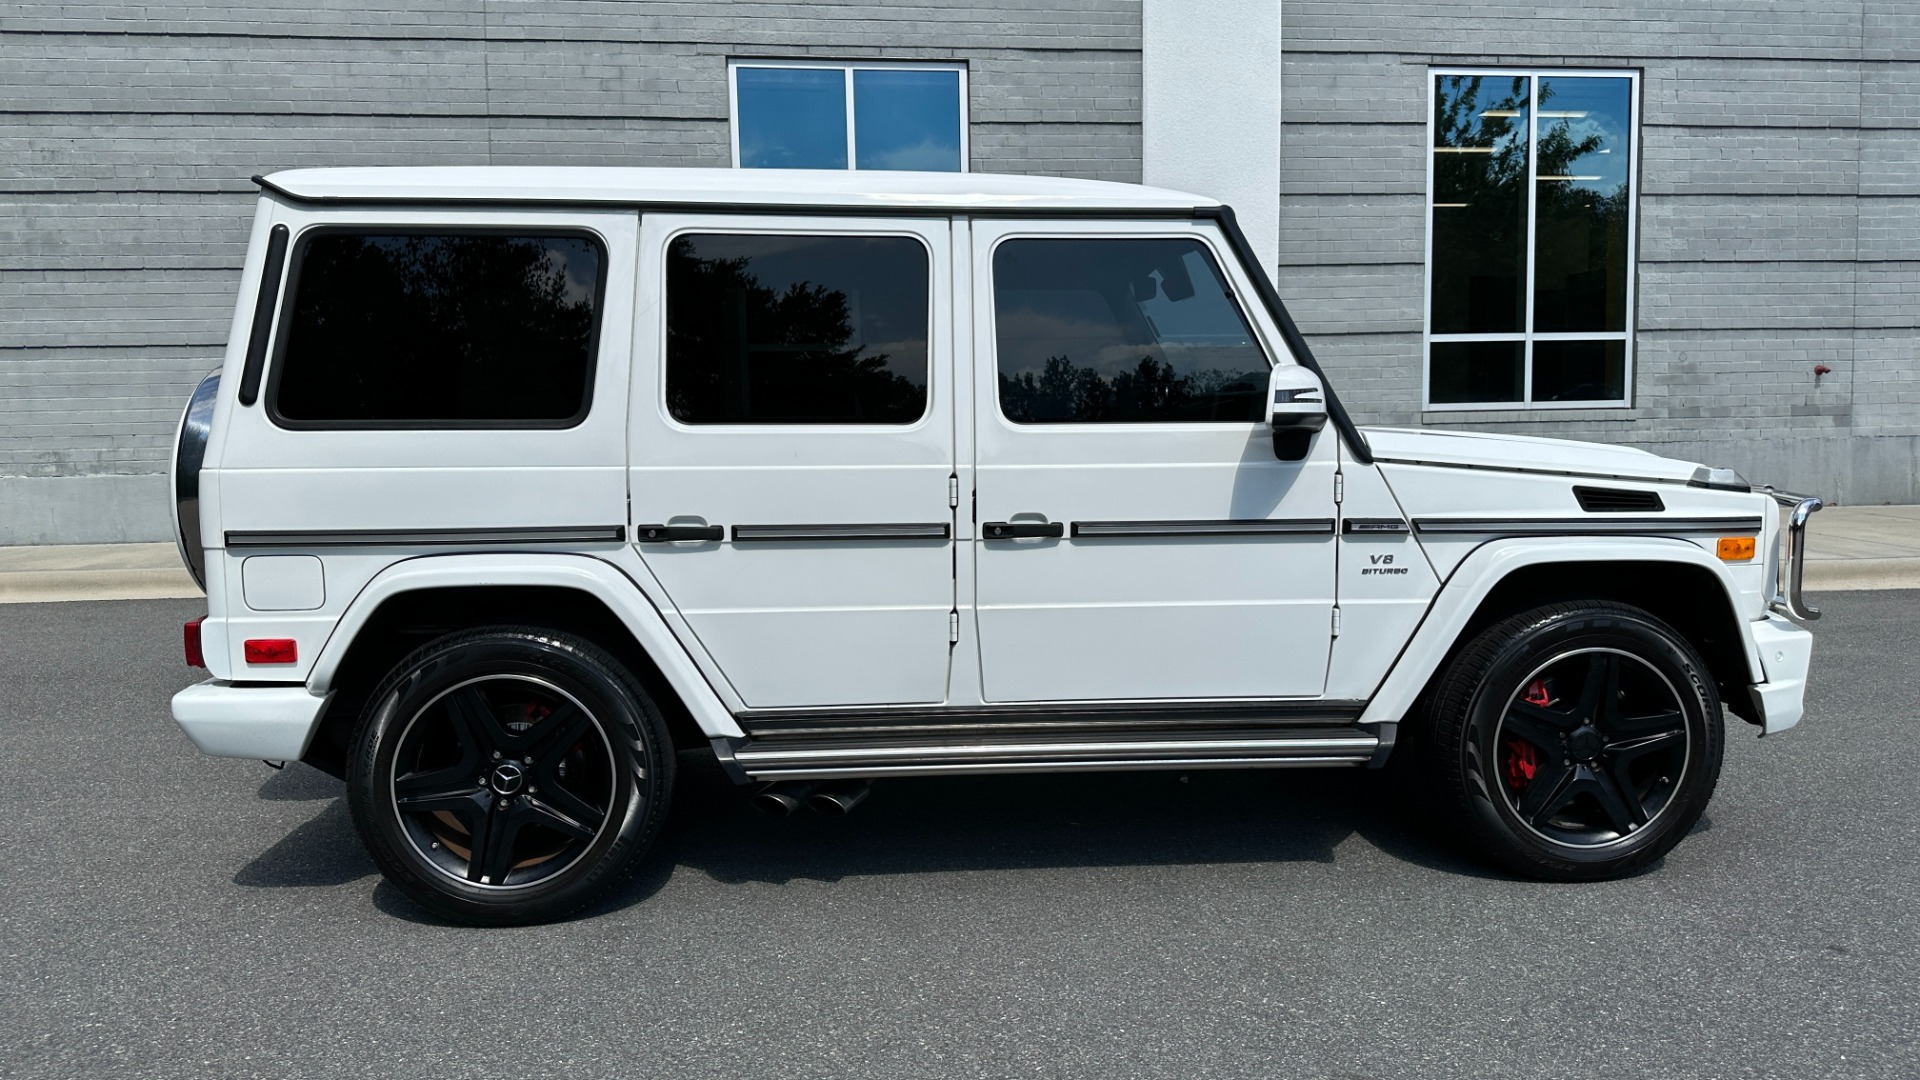 Used 2014 Mercedes-Benz G-Class G 63 AMG / DESIGNO LEATHER / DIAMOND STITCH / SPORTS SEATS / PA6 PKG for sale $67,995 at Formula Imports in Charlotte NC 28227 3